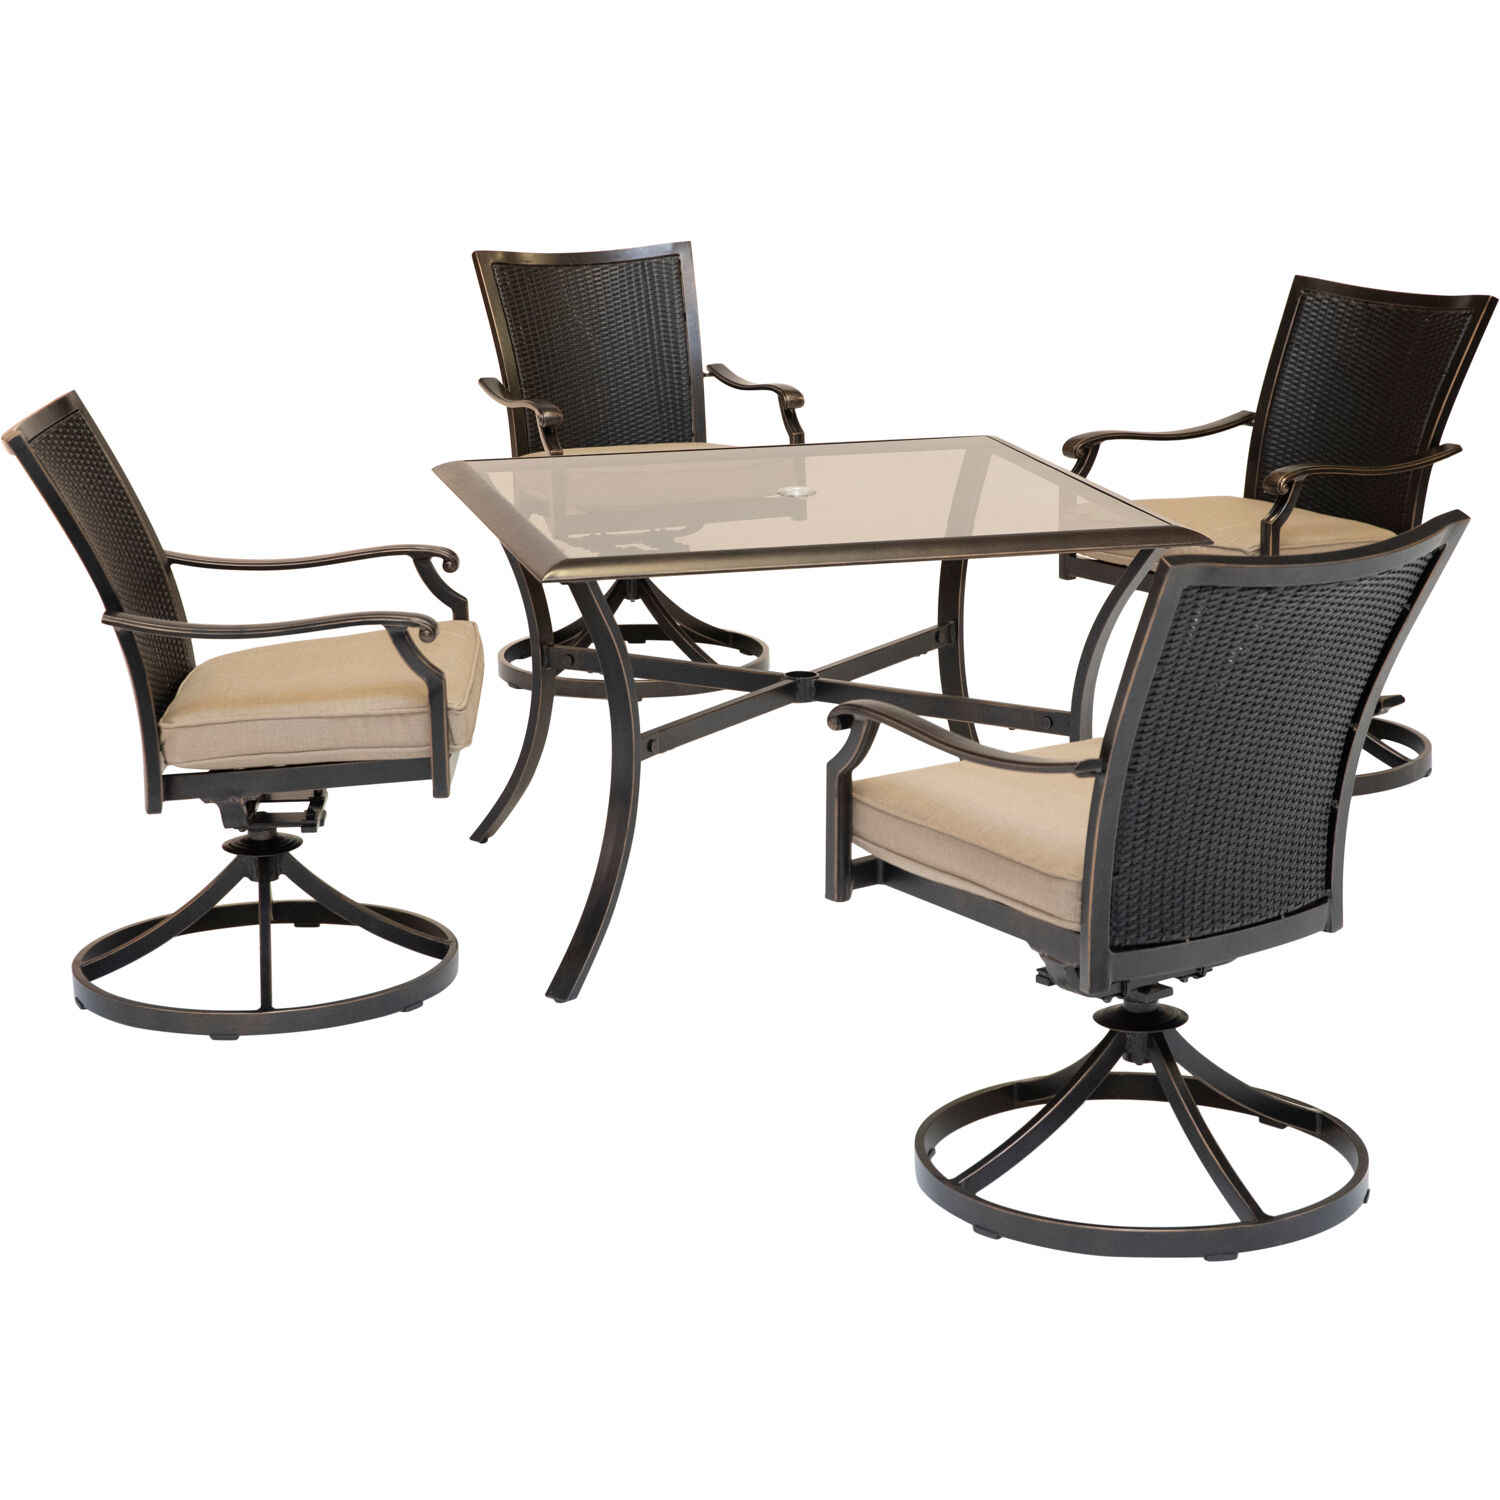 Hanover Traditions 5-Piece Outdoor Patio Dining Set, Wicker Back Cast Aluminum Chairs and 42"  Table - image 1 of 9